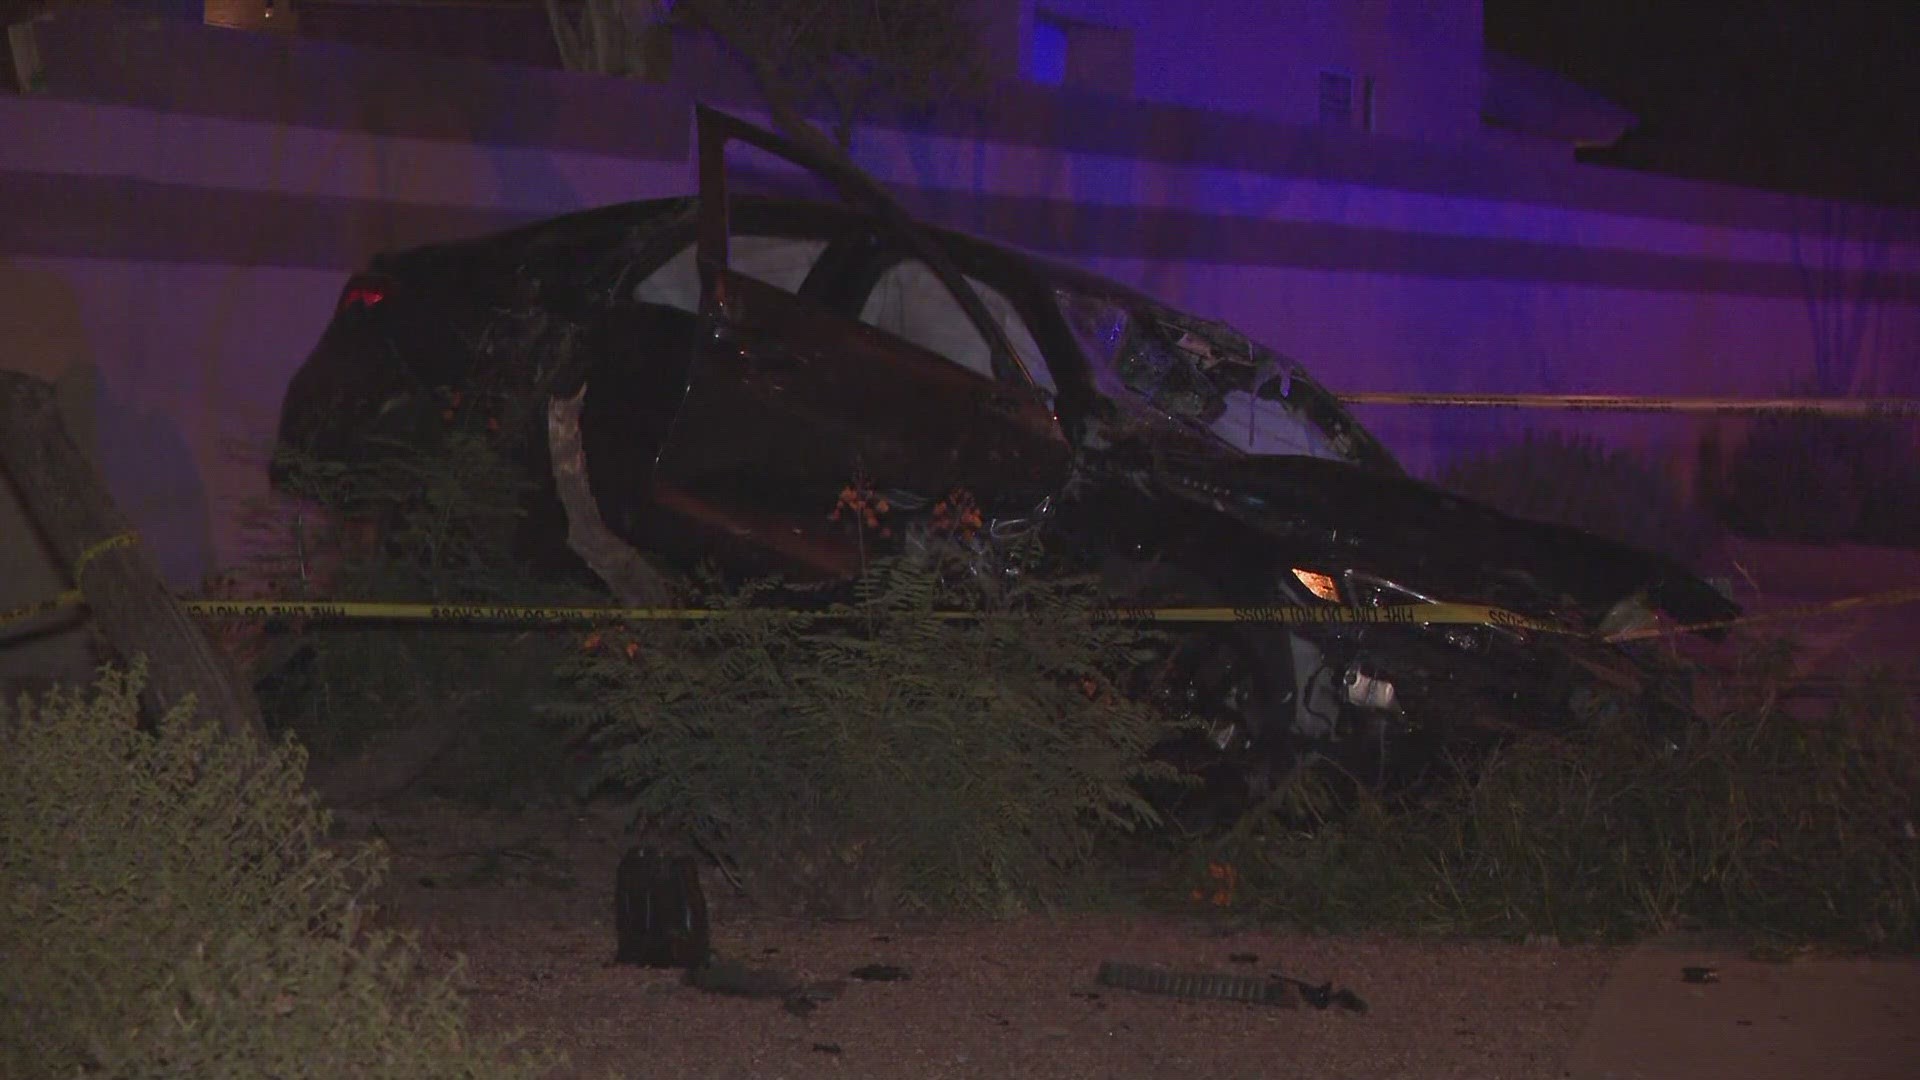 Police say speed and impairment may have played a factor in the crash near Riggs and Gilbert roads Monday night.